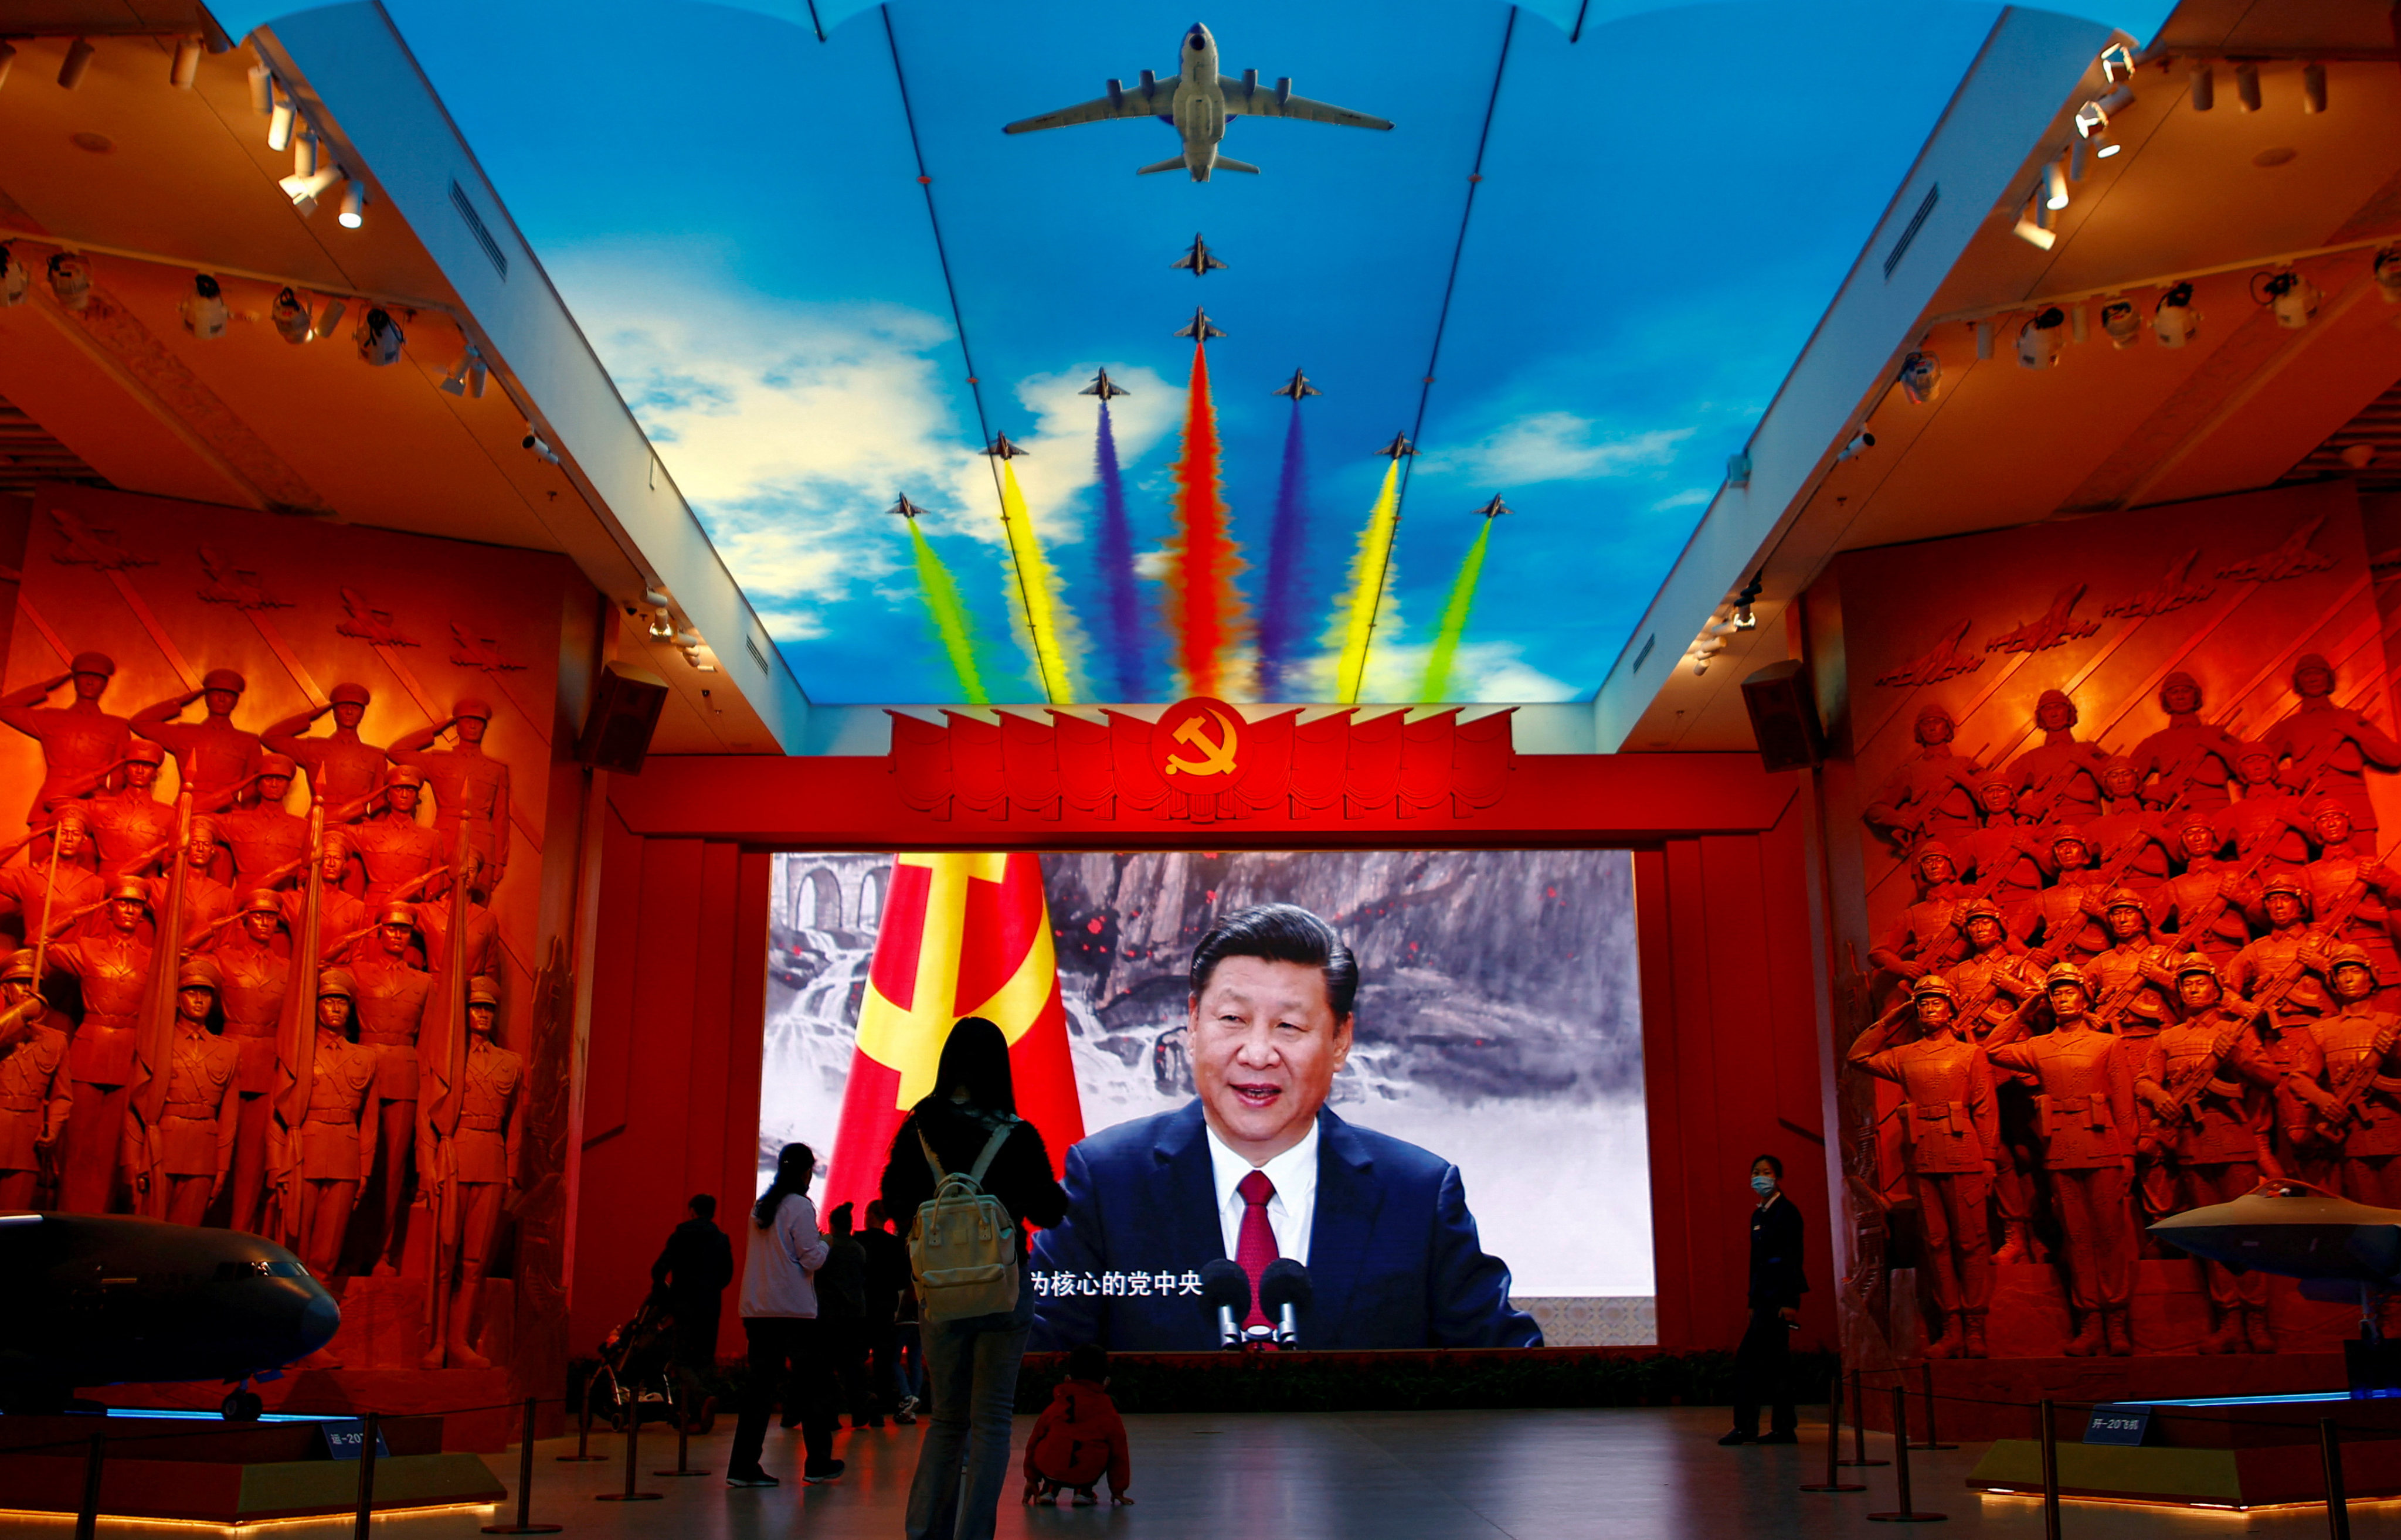 Saturday’s resolution also included a number of President Xi Jinping’s signature policies and slogans, consolidating his power and influence. Photo: Reuters